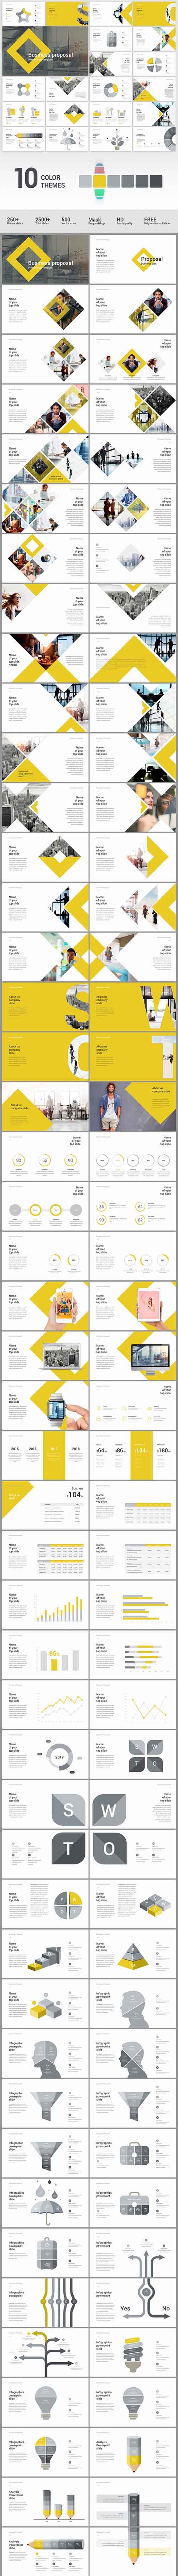 Business Proposal Powerpoint Template 20239379